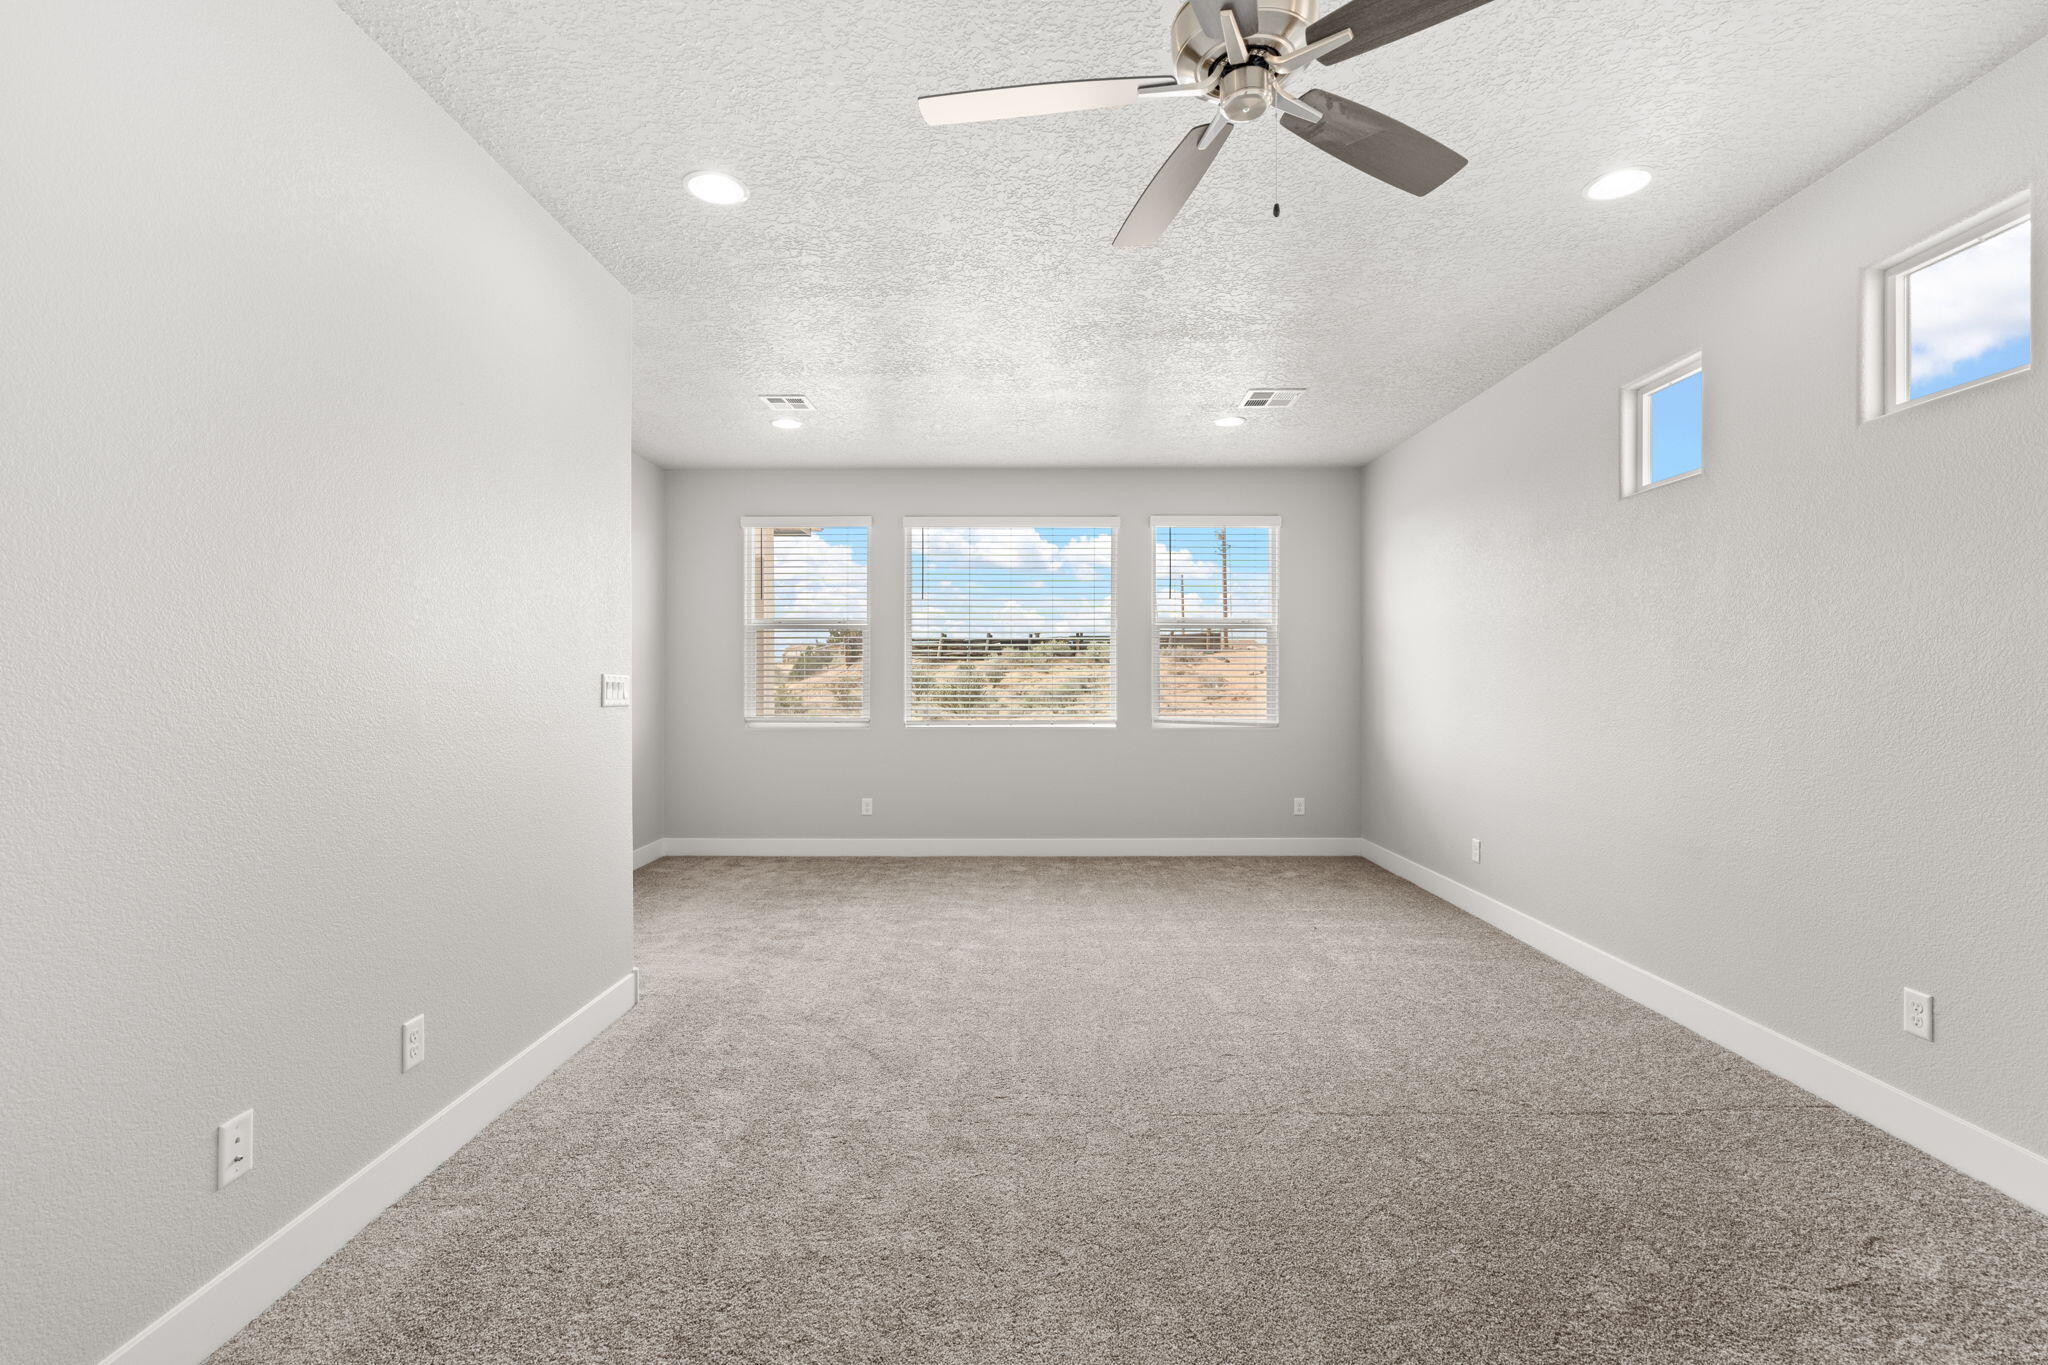 510 11th Avenue NW, Rio Rancho, New Mexico 87144, 4 Bedrooms Bedrooms, ,3 BathroomsBathrooms,Residential,For Sale,510 11th Avenue NW,1062264